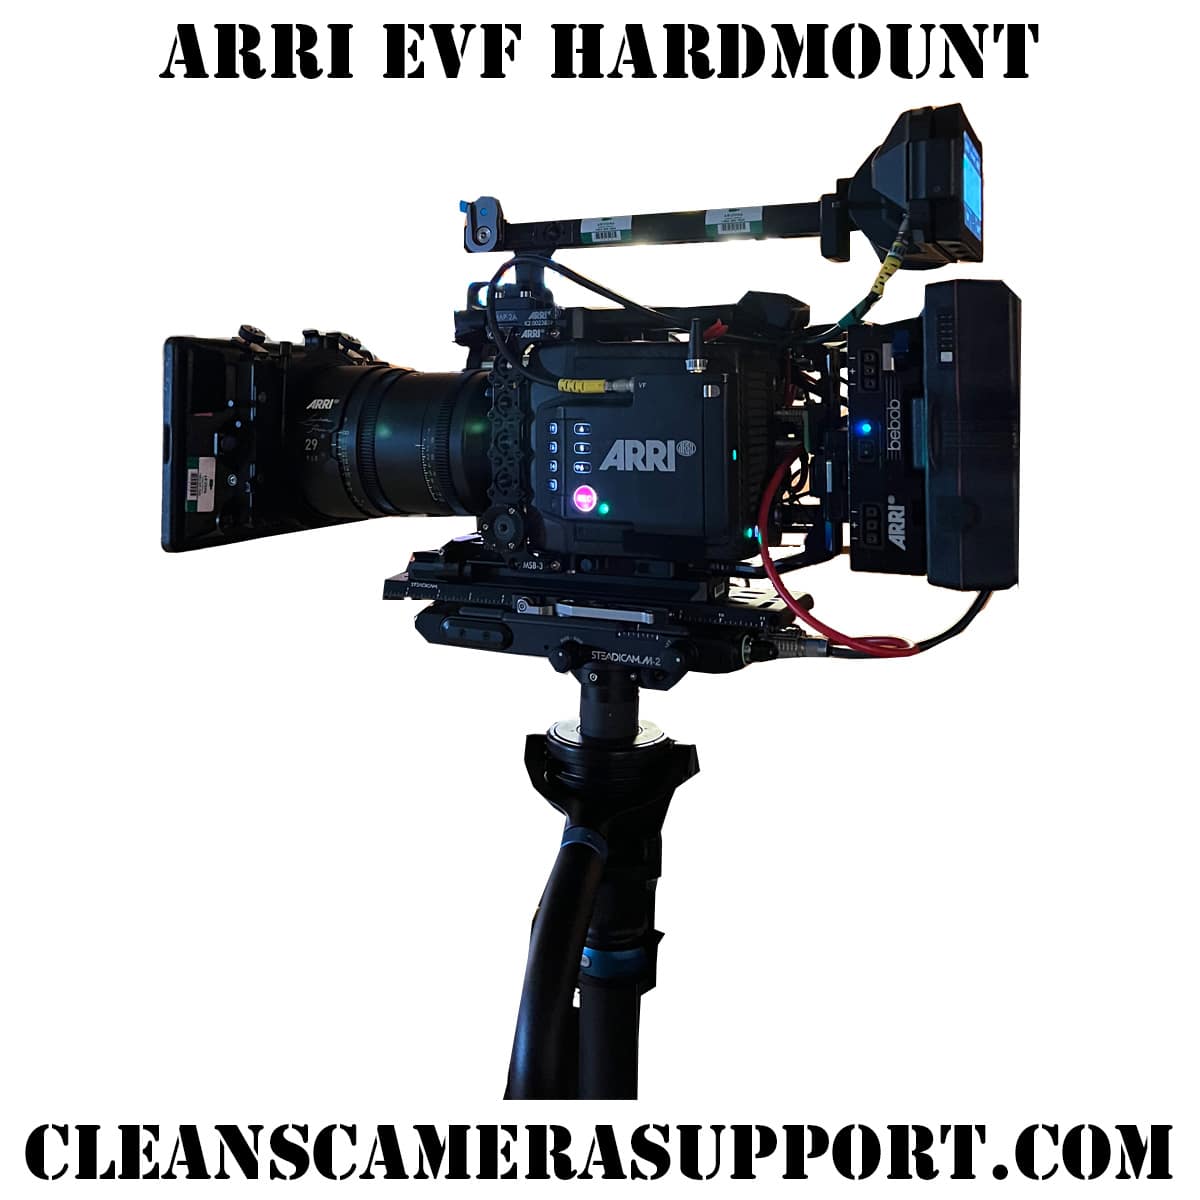 arri evf hardmount from cleans camera support